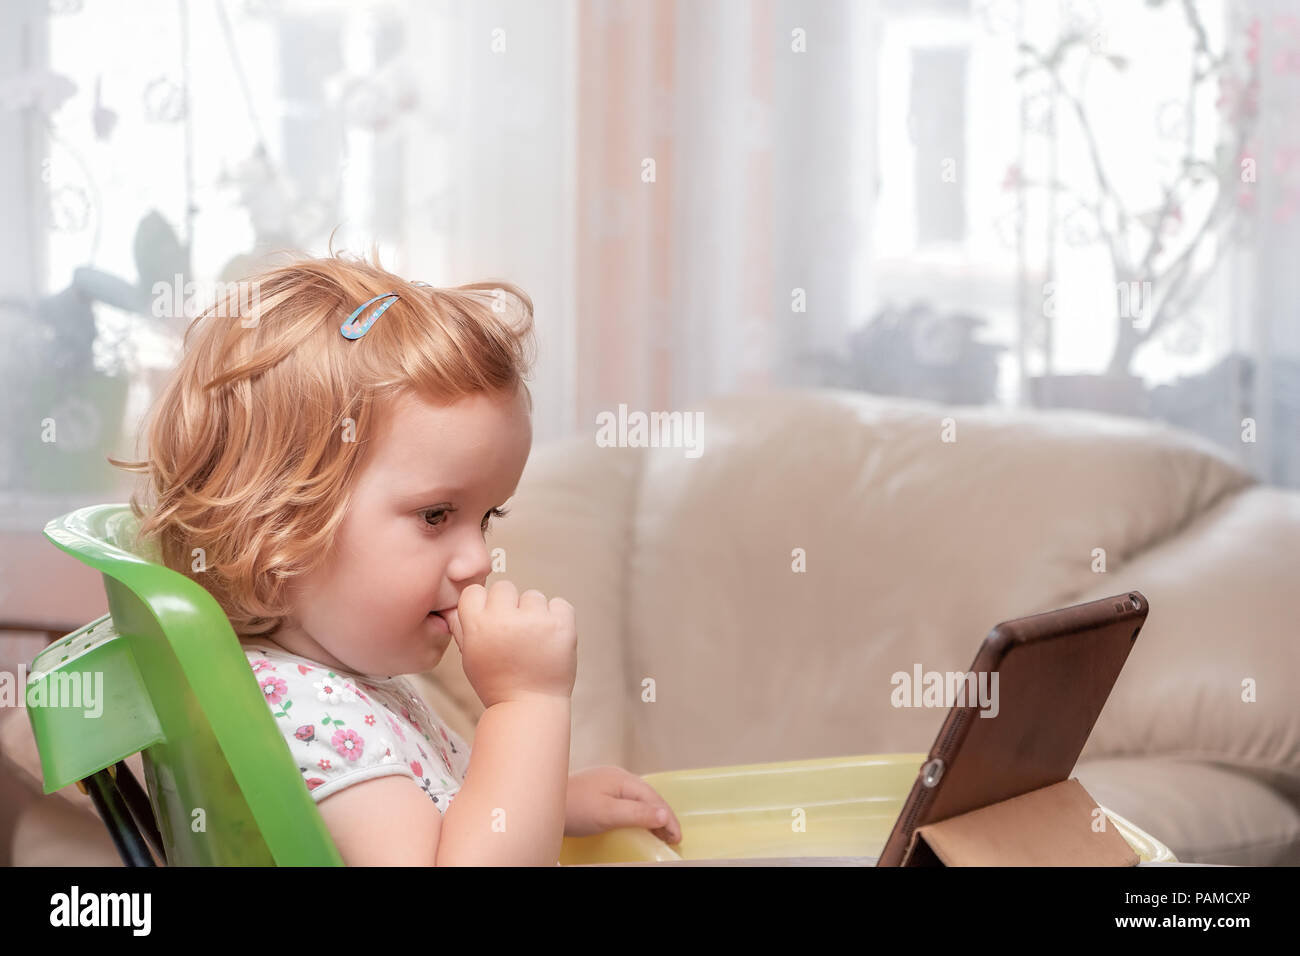 Soft portrait of two years blond kid, girl looking  at a tablet. Family lifestyle. Stock Photo